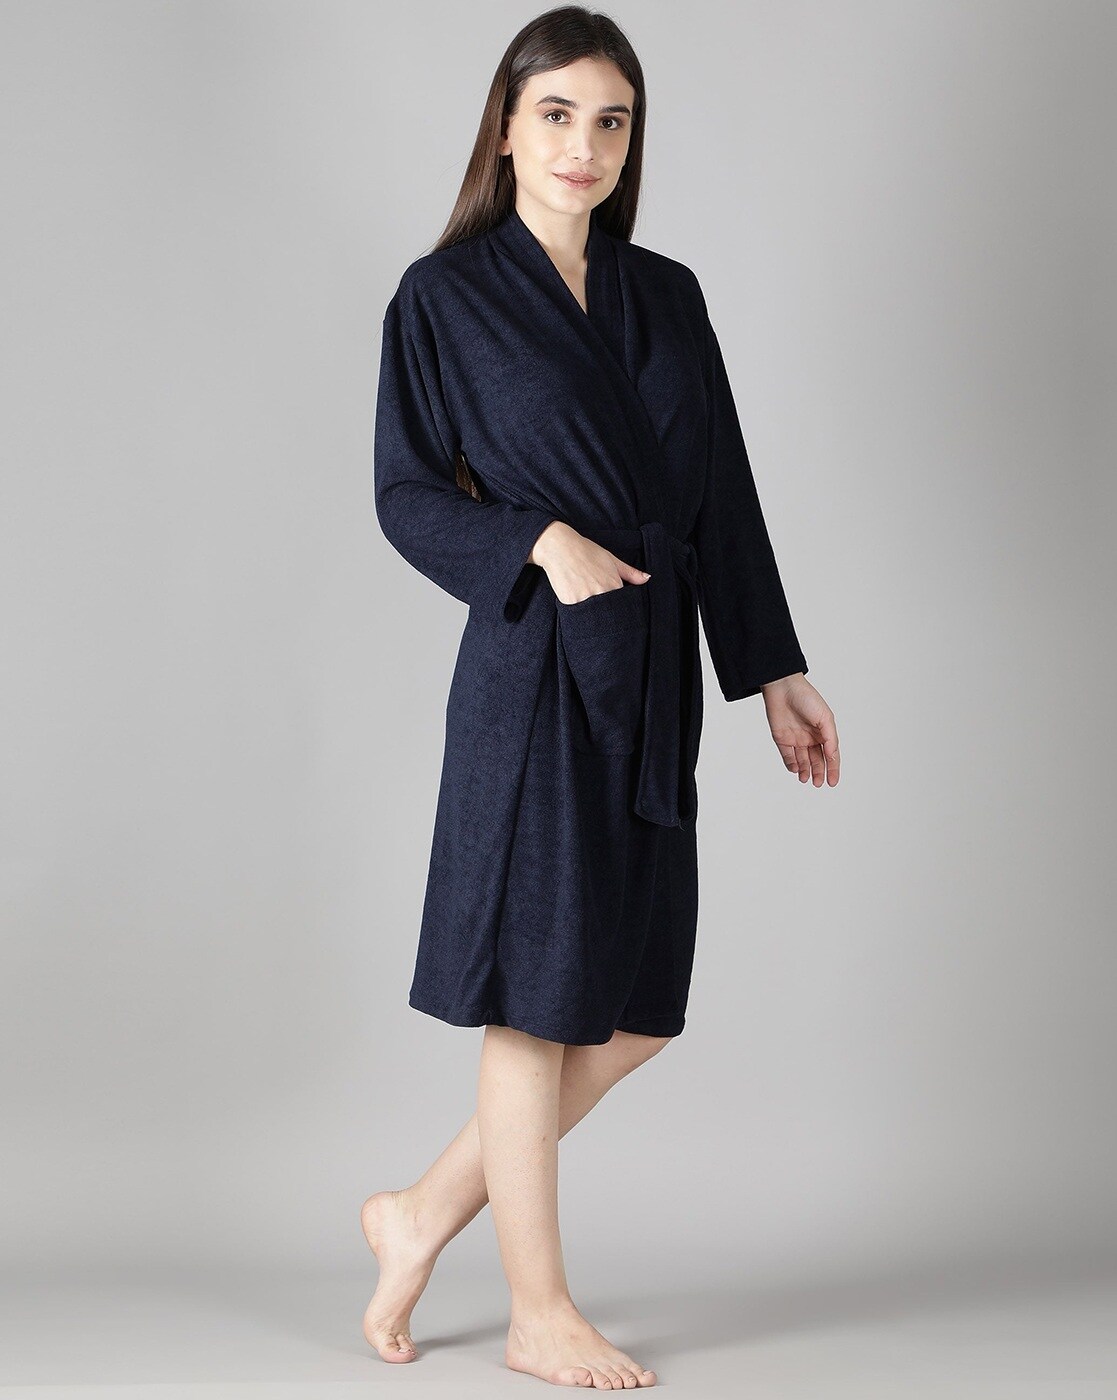 John Lewis Frosted Fleece Rib Dressing Gown, Grey at John Lewis & Partners